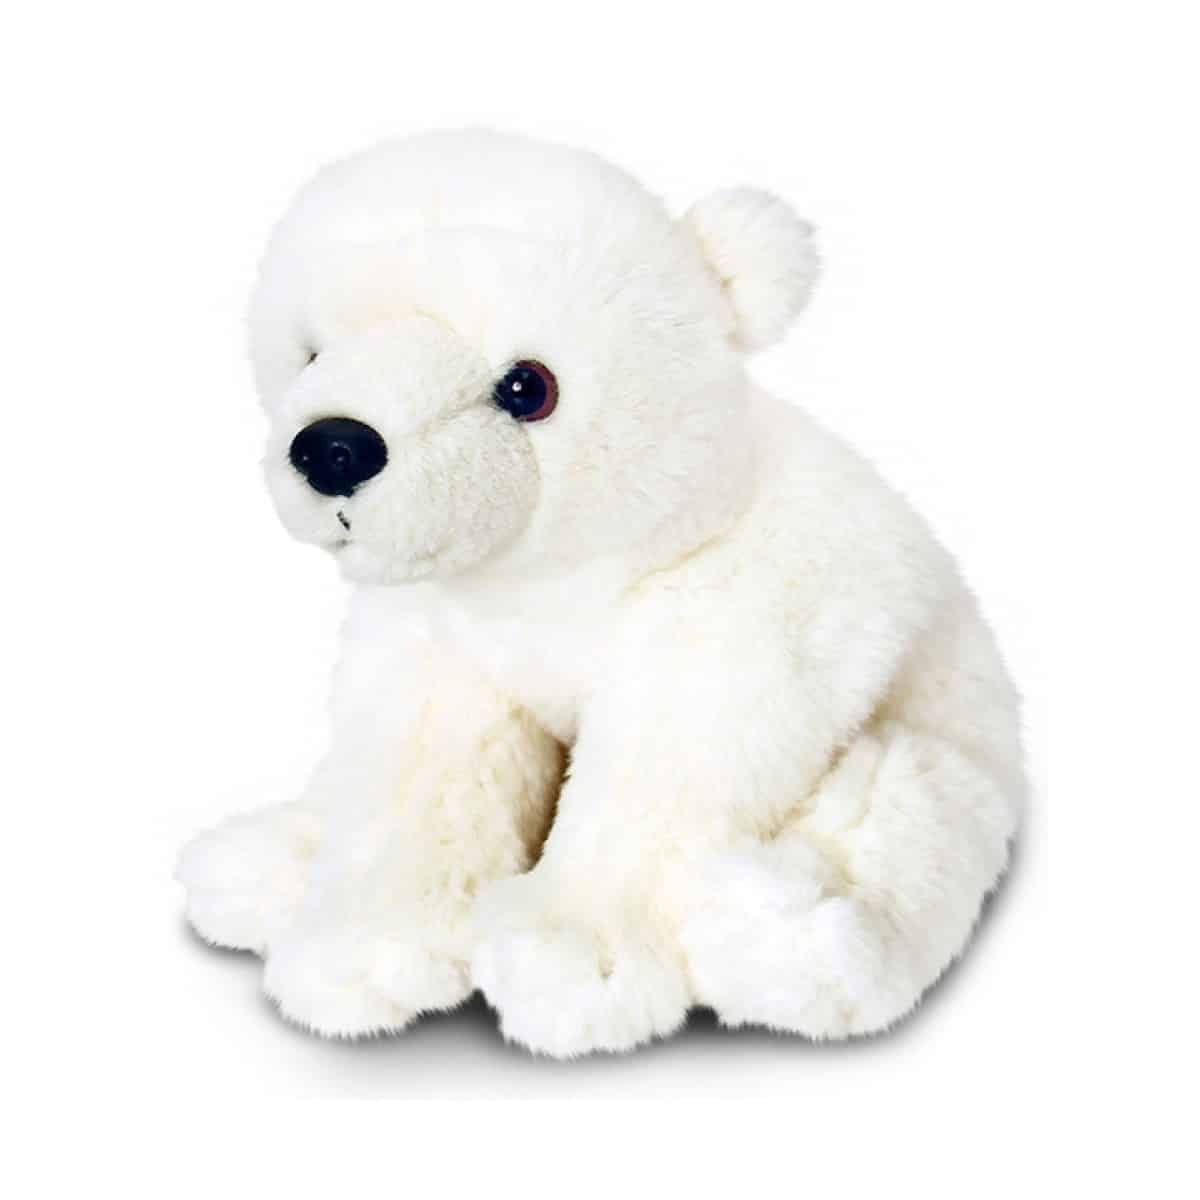 petite peluche ours